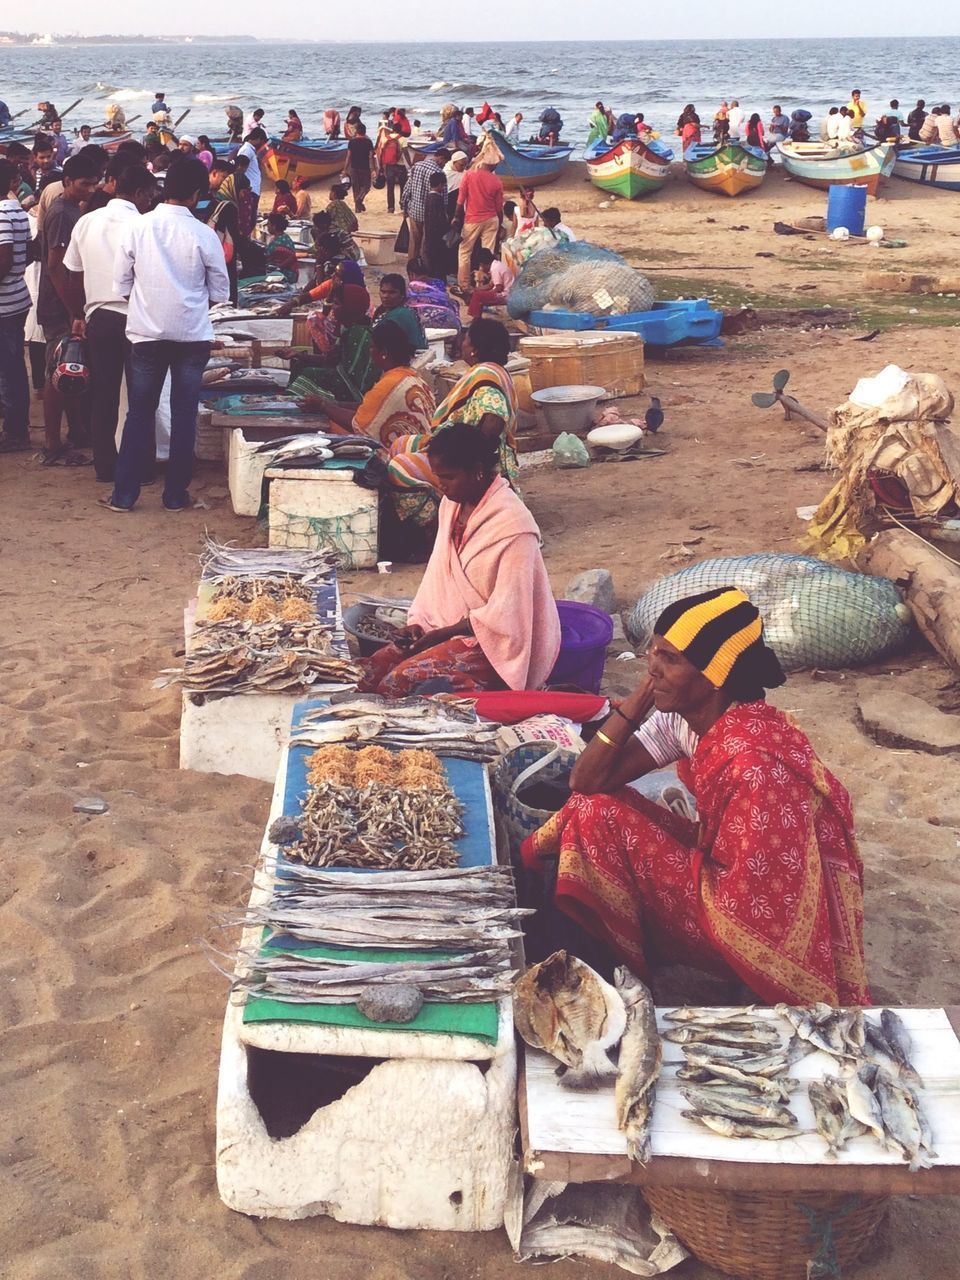 GROUP OF PEOPLE FOR SALE AT MARKET